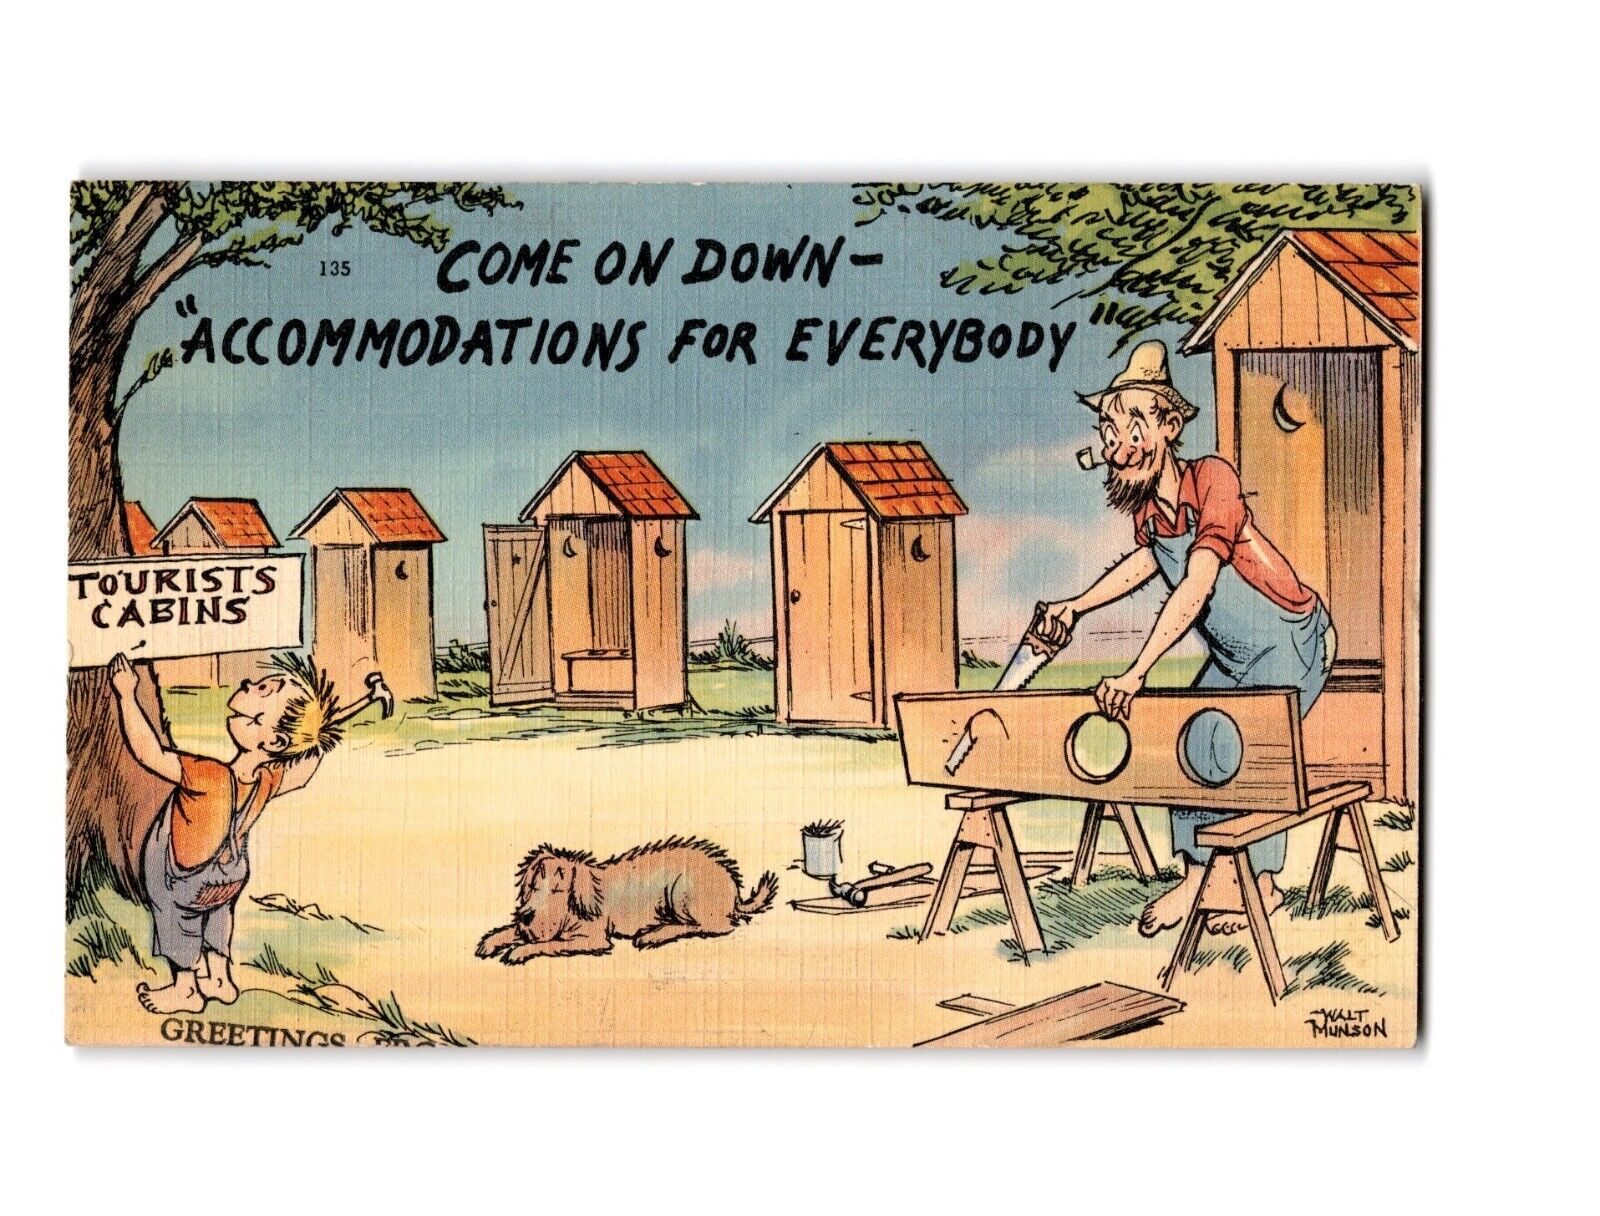 Vintage Comic Postcard Tourists Cabins Accommodations Illustrated by Walt Munson